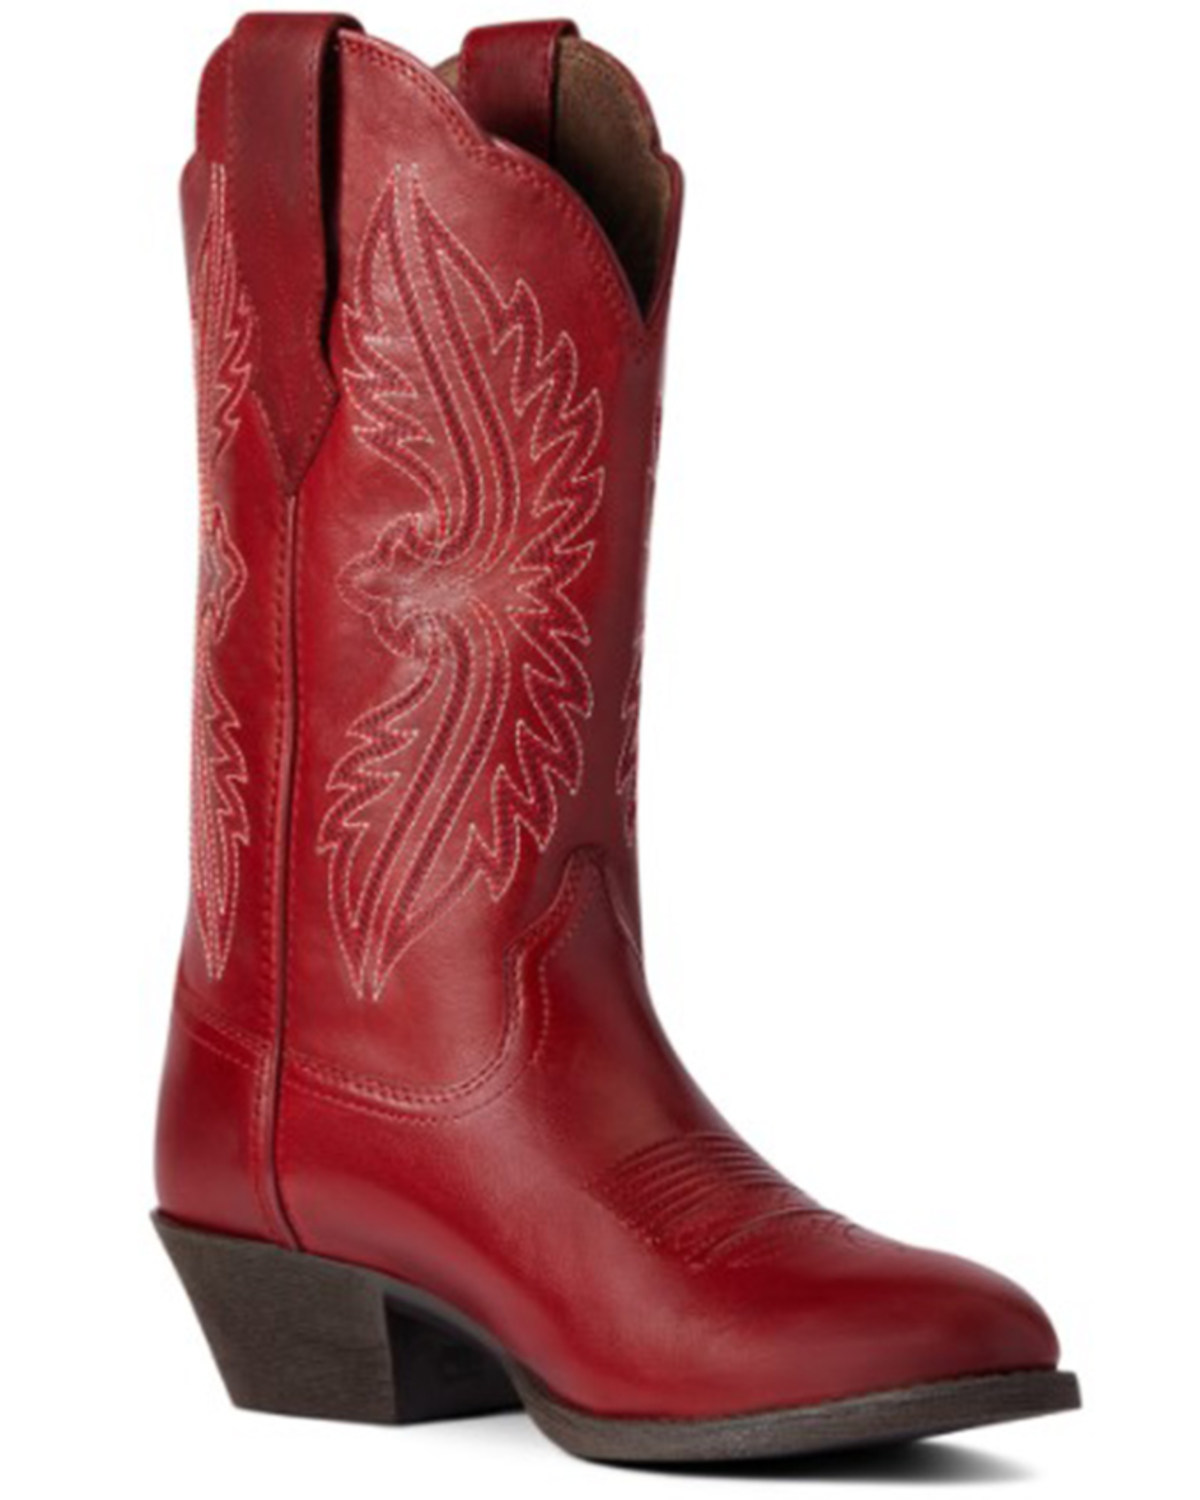 Ariat Women's Rosy Red Heritage R Toe Stretch Fit Full-Grain Western Boot - Round